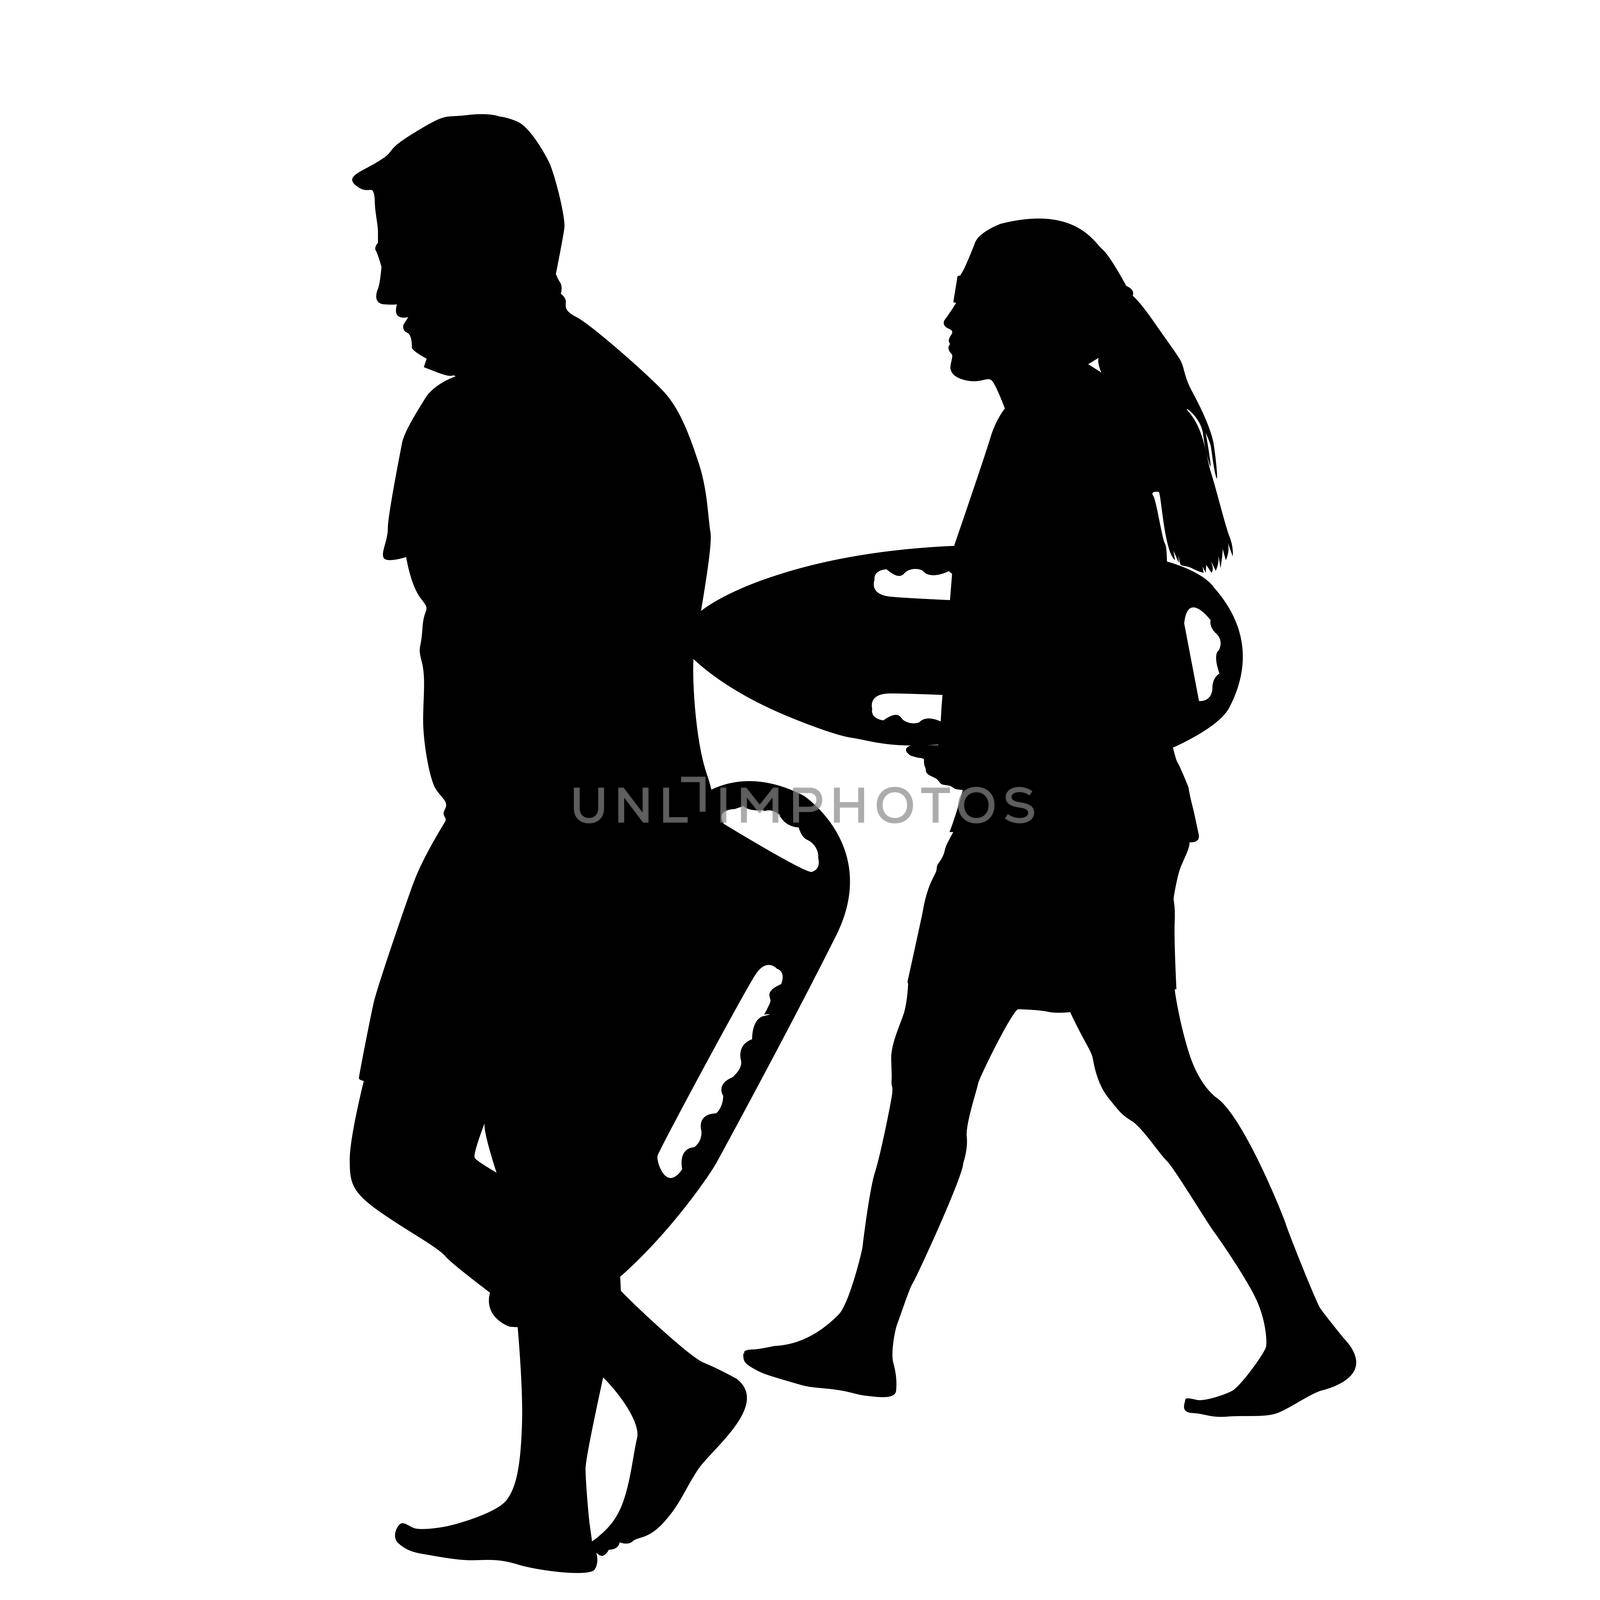 Silhouettes of male and female lifeguards holding rescue cans by hibrida13